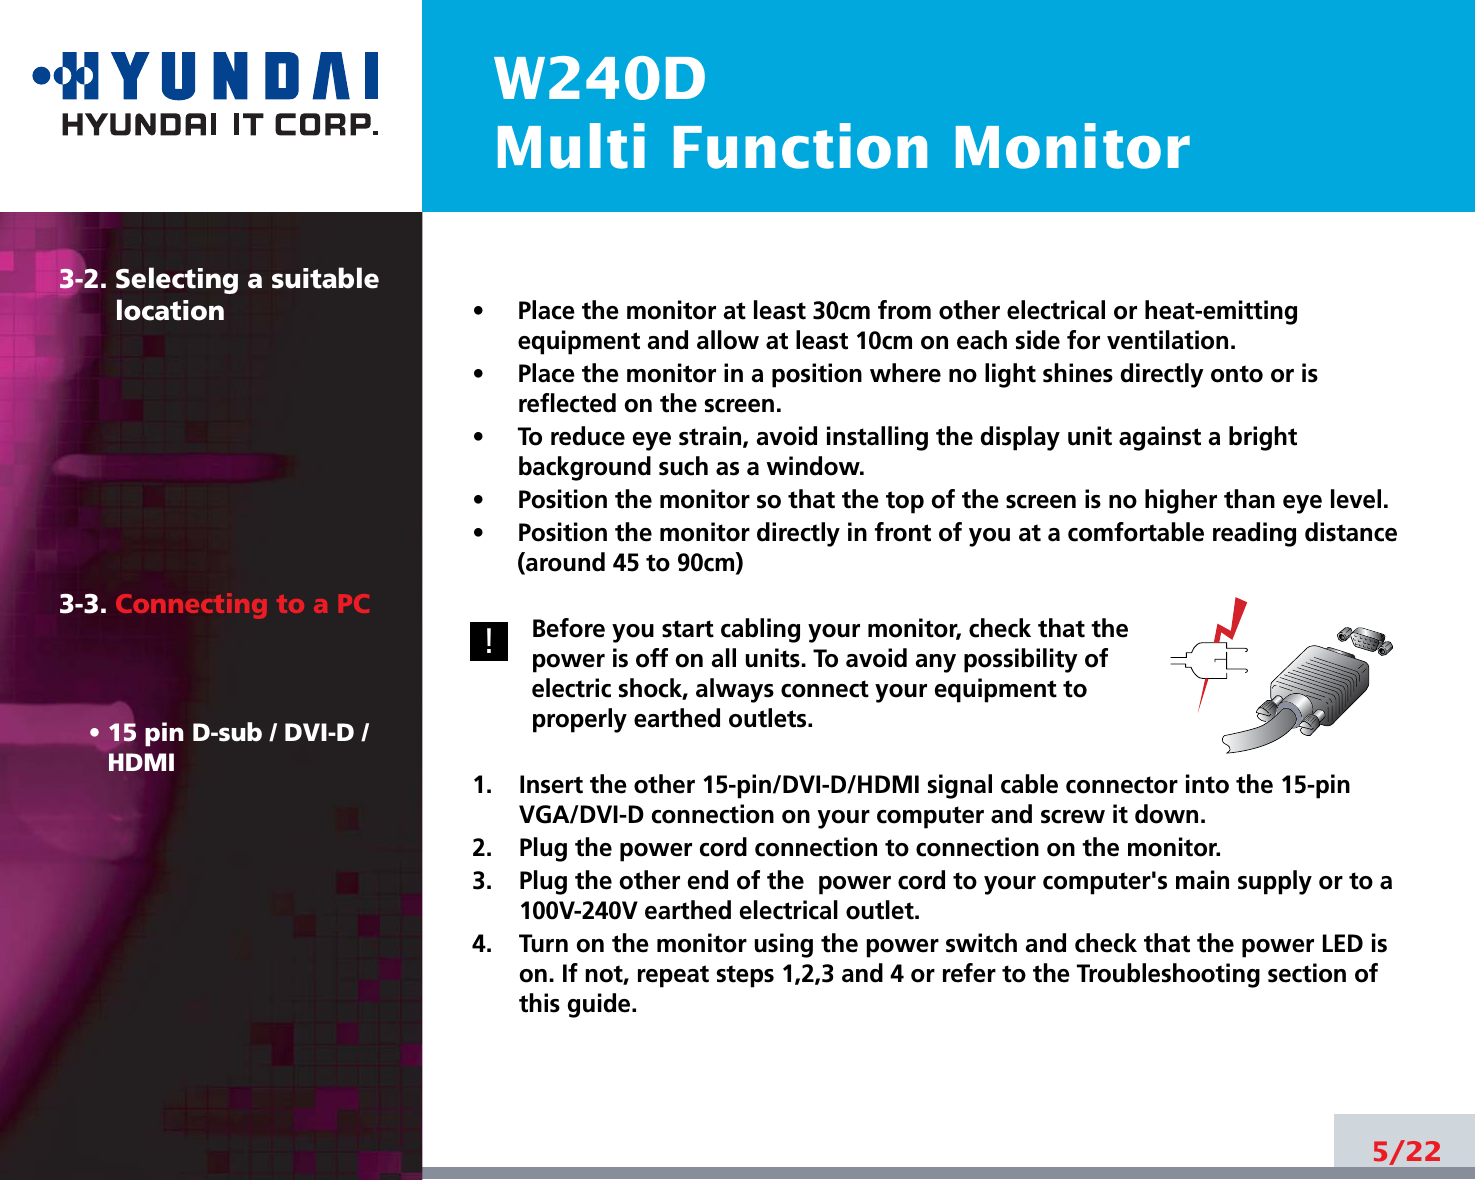 W240DMulti Function Monitor5/223-2. Selecting a suitablelocation3-3. Connecting to a PC• 15 pin D-sub / DVI-D /HDMI•     Place the monitor at least 30cm from other electrical or heat-emittingequipment and allow at least 10cm on each side for ventilation.•     Place the monitor in a position where no light shines directly onto or isreflected on the screen.•     To reduce eye strain, avoid installing the display unit against a brightbackground such as a window.•     Position the monitor so that the top of the screen is no higher than eye level.•     Position the monitor directly in front of you at a comfortable reading distance(around 45 to 90cm) Before you start cabling your monitor, check that thepower is off on all units. To avoid any possibility ofelectric shock, always connect your equipment toproperly earthed outlets.1.    Insert the other 15-pin/DVI-D/HDMI signal cable connector into the 15-pinVGA/DVI-D connection on your computer and screw it down. 2.    Plug the power cord connection to connection on the monitor.3.    Plug the other end of the  power cord to your computer&apos;s main supply or to a100V-240V earthed electrical outlet.4.    Turn on the monitor using the power switch and check that the power LED ison. If not, repeat steps 1,2,3 and 4 or refer to the Troubleshooting section ofthis guide.!!